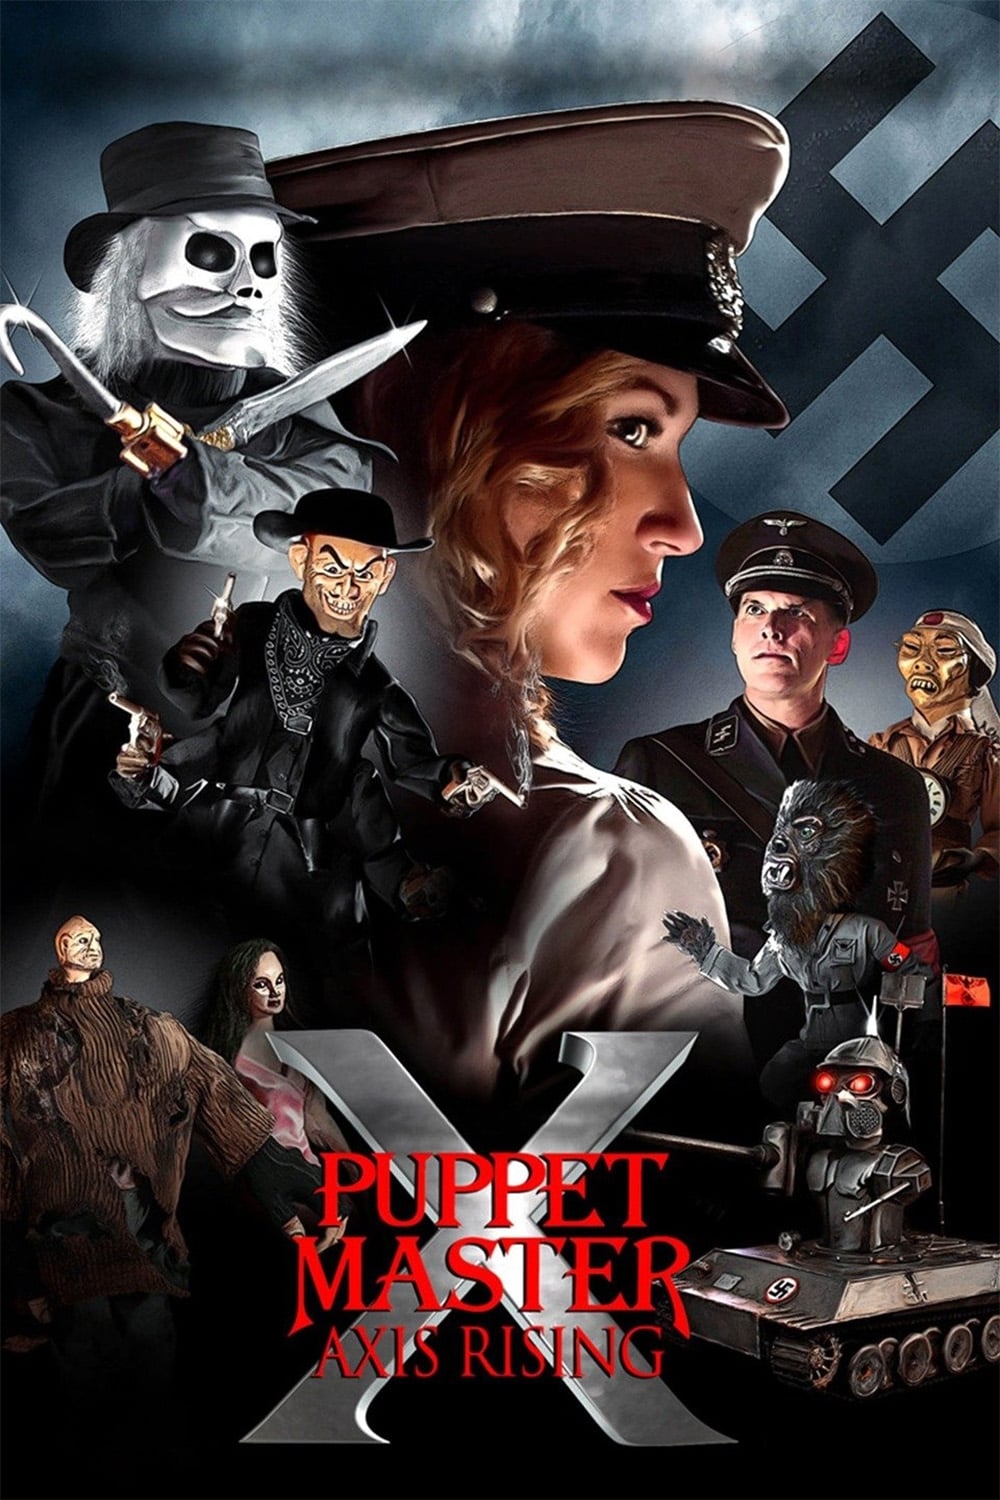 Puppet Master X: Axis Rising film